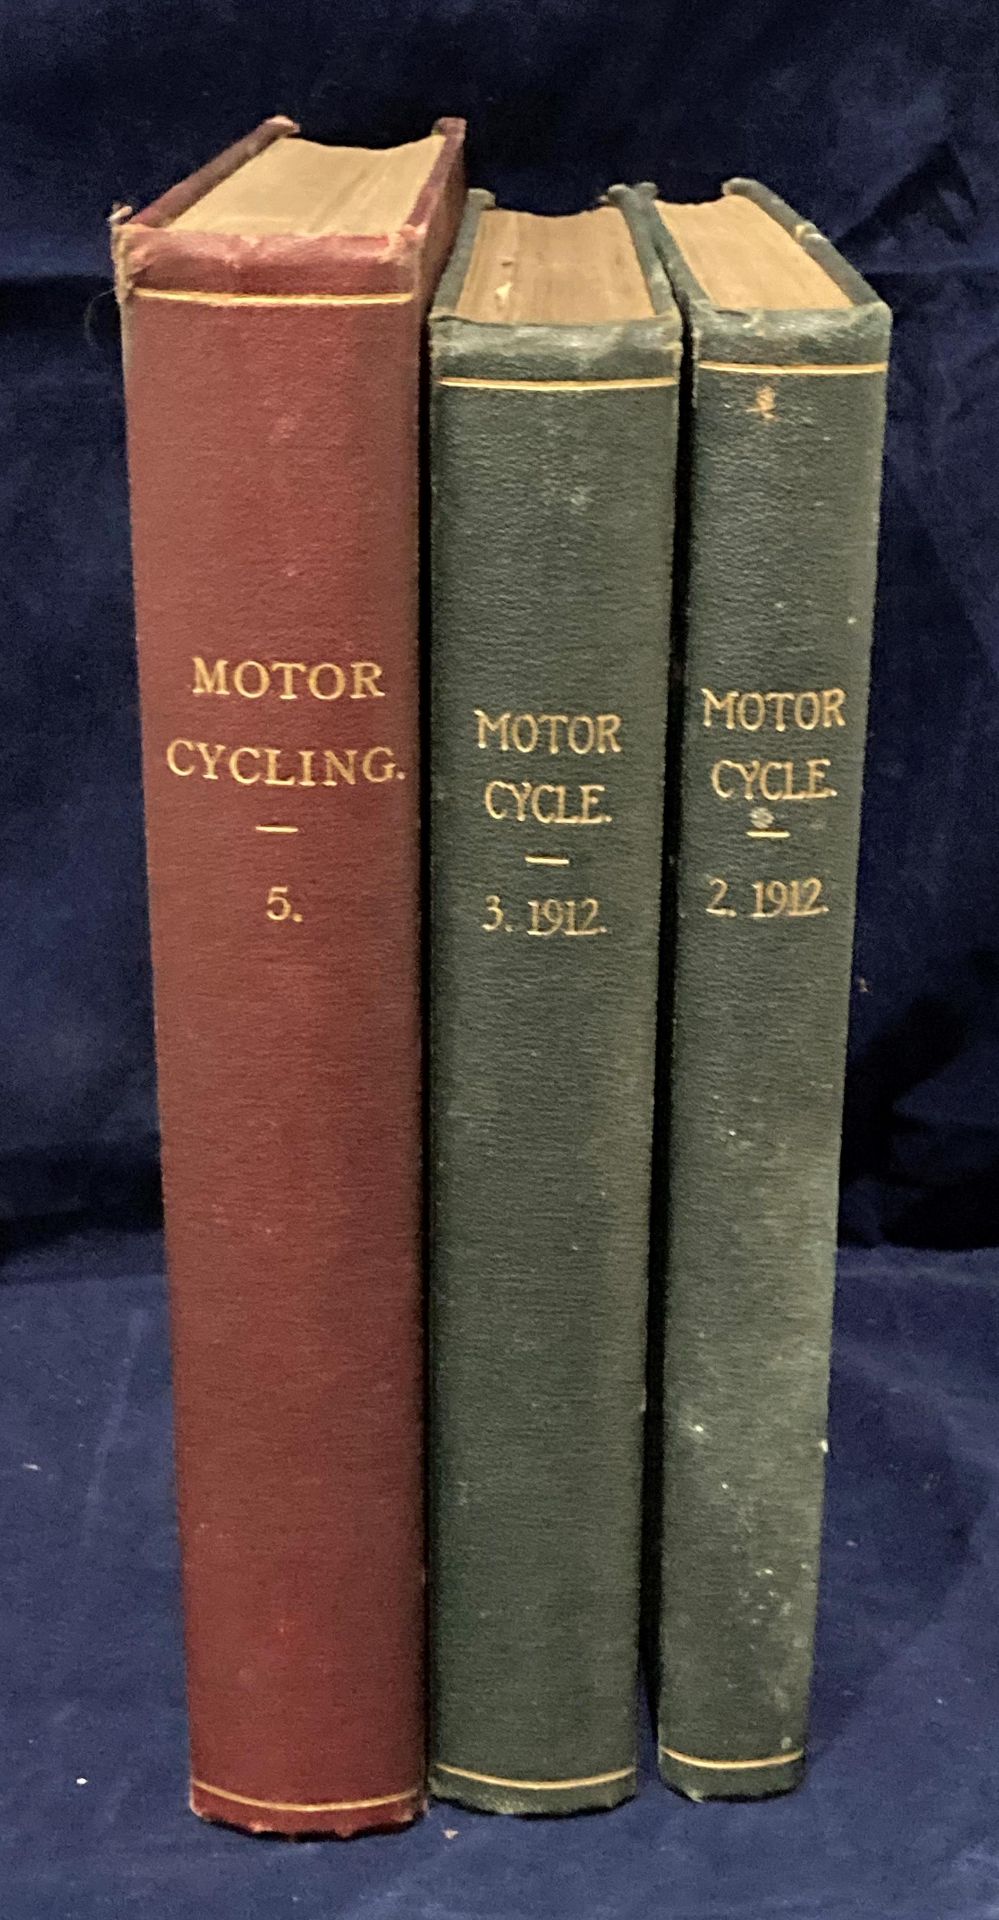 Motor Cycle, vols 2 & 3 of 1912 from vol 10 no 475,